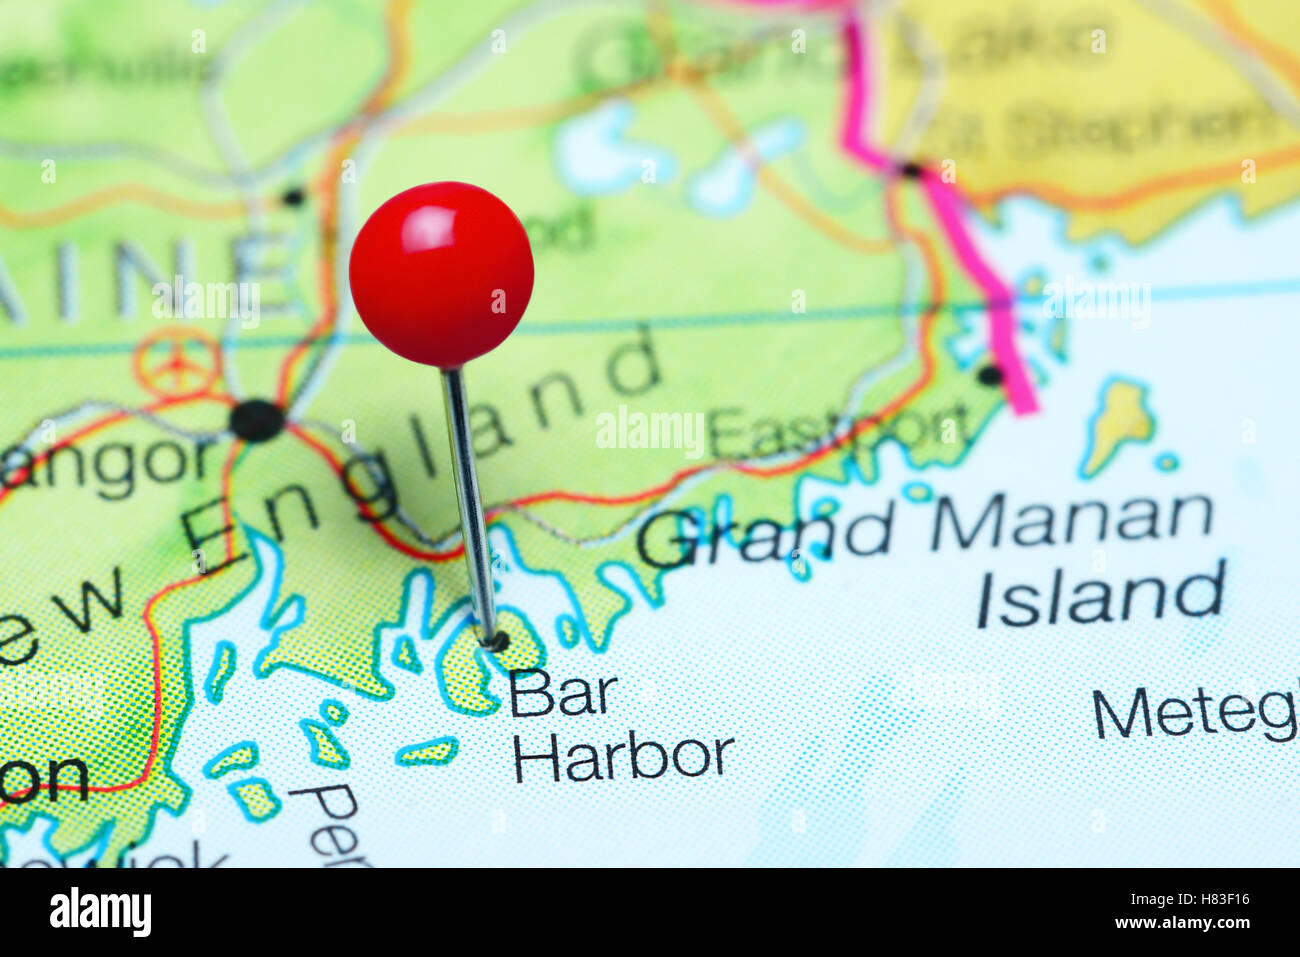 Bar Harbor pinned on a map of Maine, USA Stock Photo